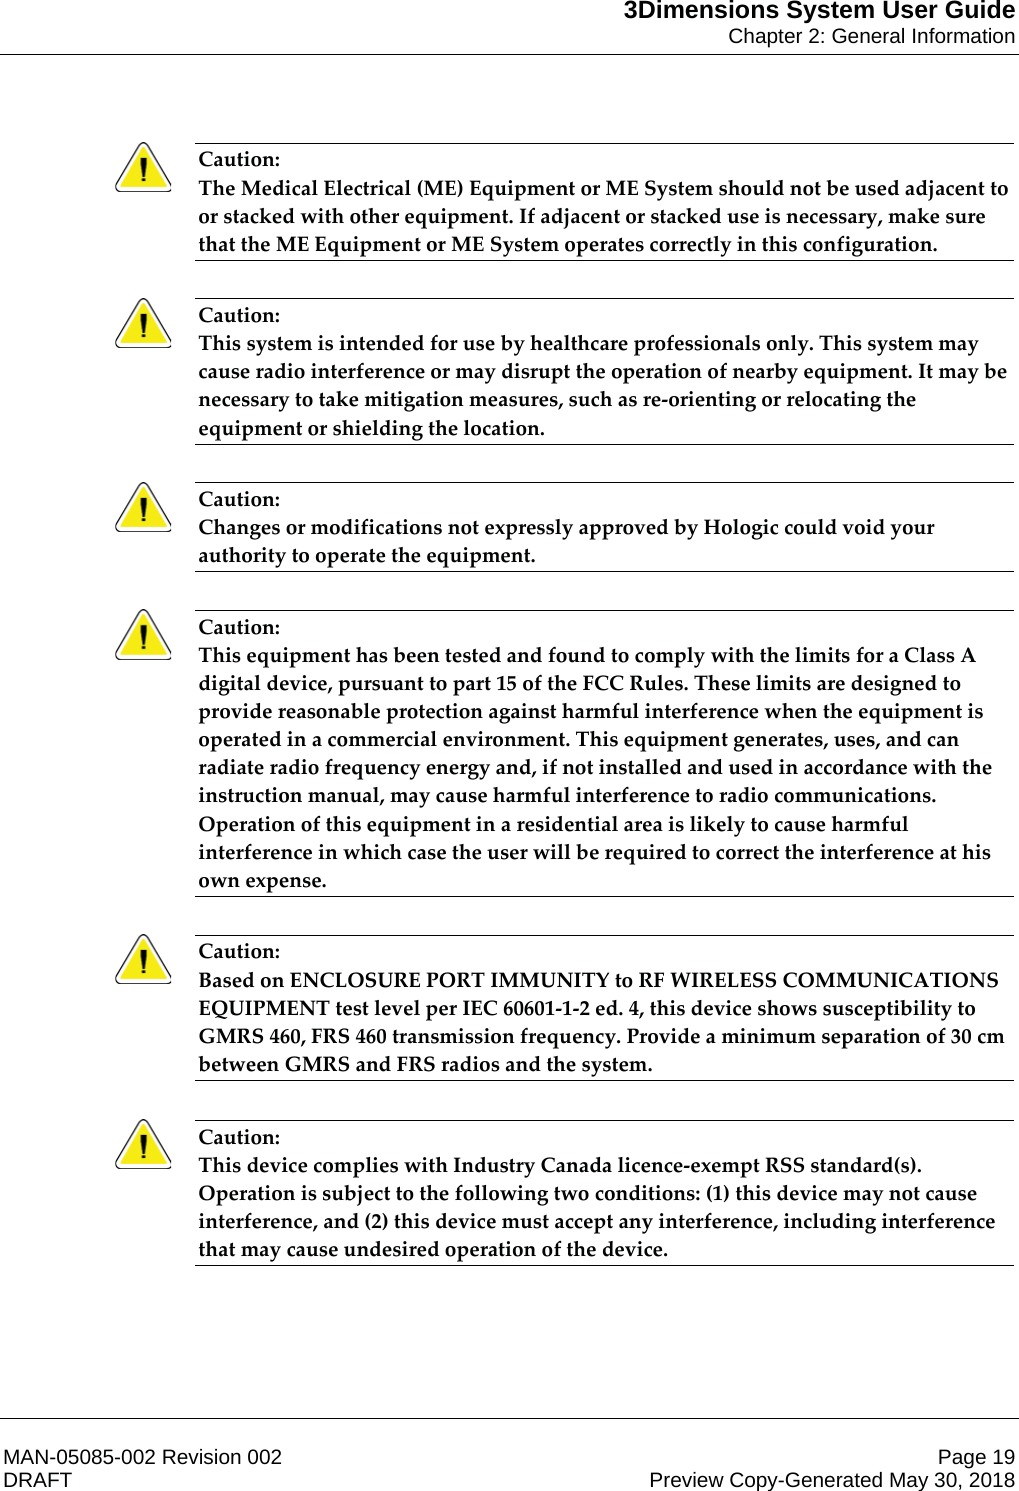 3Dimensions System User GuideChapter 2: General InformationMAN-05085-002 Revision 002 Page 19DRAFT Preview Copy-Generated May 30, 2018Caution: The Medical Electrical (ME) Equipment or ME System should not be used adjacent to or stacked with other equipment. If adjacent or stacked use is necessary, make sure that the ME Equipment or ME System operates correctly in this configuration.    Caution: This system is intended for use by healthcare professionals only. This system may cause radio interference or may disrupt the operation of nearby equipment. It may be necessary to take mitigation measures, such as re-orienting or relocating the equipment or shielding the location.    Caution: Changes or modifications not expressly approved by Hologic could void your authority to operate the equipment.    Caution: This equipment has been tested and found to comply with the limits for a Class A digital device, pursuant to part 15 of the FCC Rules. These limits are designed to provide reasonable protection against harmful interference when the equipment is operated in a commercial environment. This equipment generates, uses, and can radiate radio frequency energy and, if not installed and used in accordance with the instruction manual, may cause harmful interference to radio communications. Operation of this equipment in a residential area is likely to cause harmful interference in which case the user will be required to correct the interference at his own expense.    Caution: Based on ENCLOSURE PORT IMMUNITY to RF WIRELESS COMMUNICATIONS EQUIPMENT test level per IEC 60601-1-2 ed. 4, this device shows susceptibility to GMRS 460, FRS 460 transmission frequency. Provide a minimum separation of 30 cm between GMRS and FRS radios and the system. Caution: This device complies with Industry Canada licence-exempt RSS standard(s). Operation is subject to the following two conditions: (1) this device may not cause interference, and (2) this device must accept any interference, including interference that may cause undesired operation of the device.    